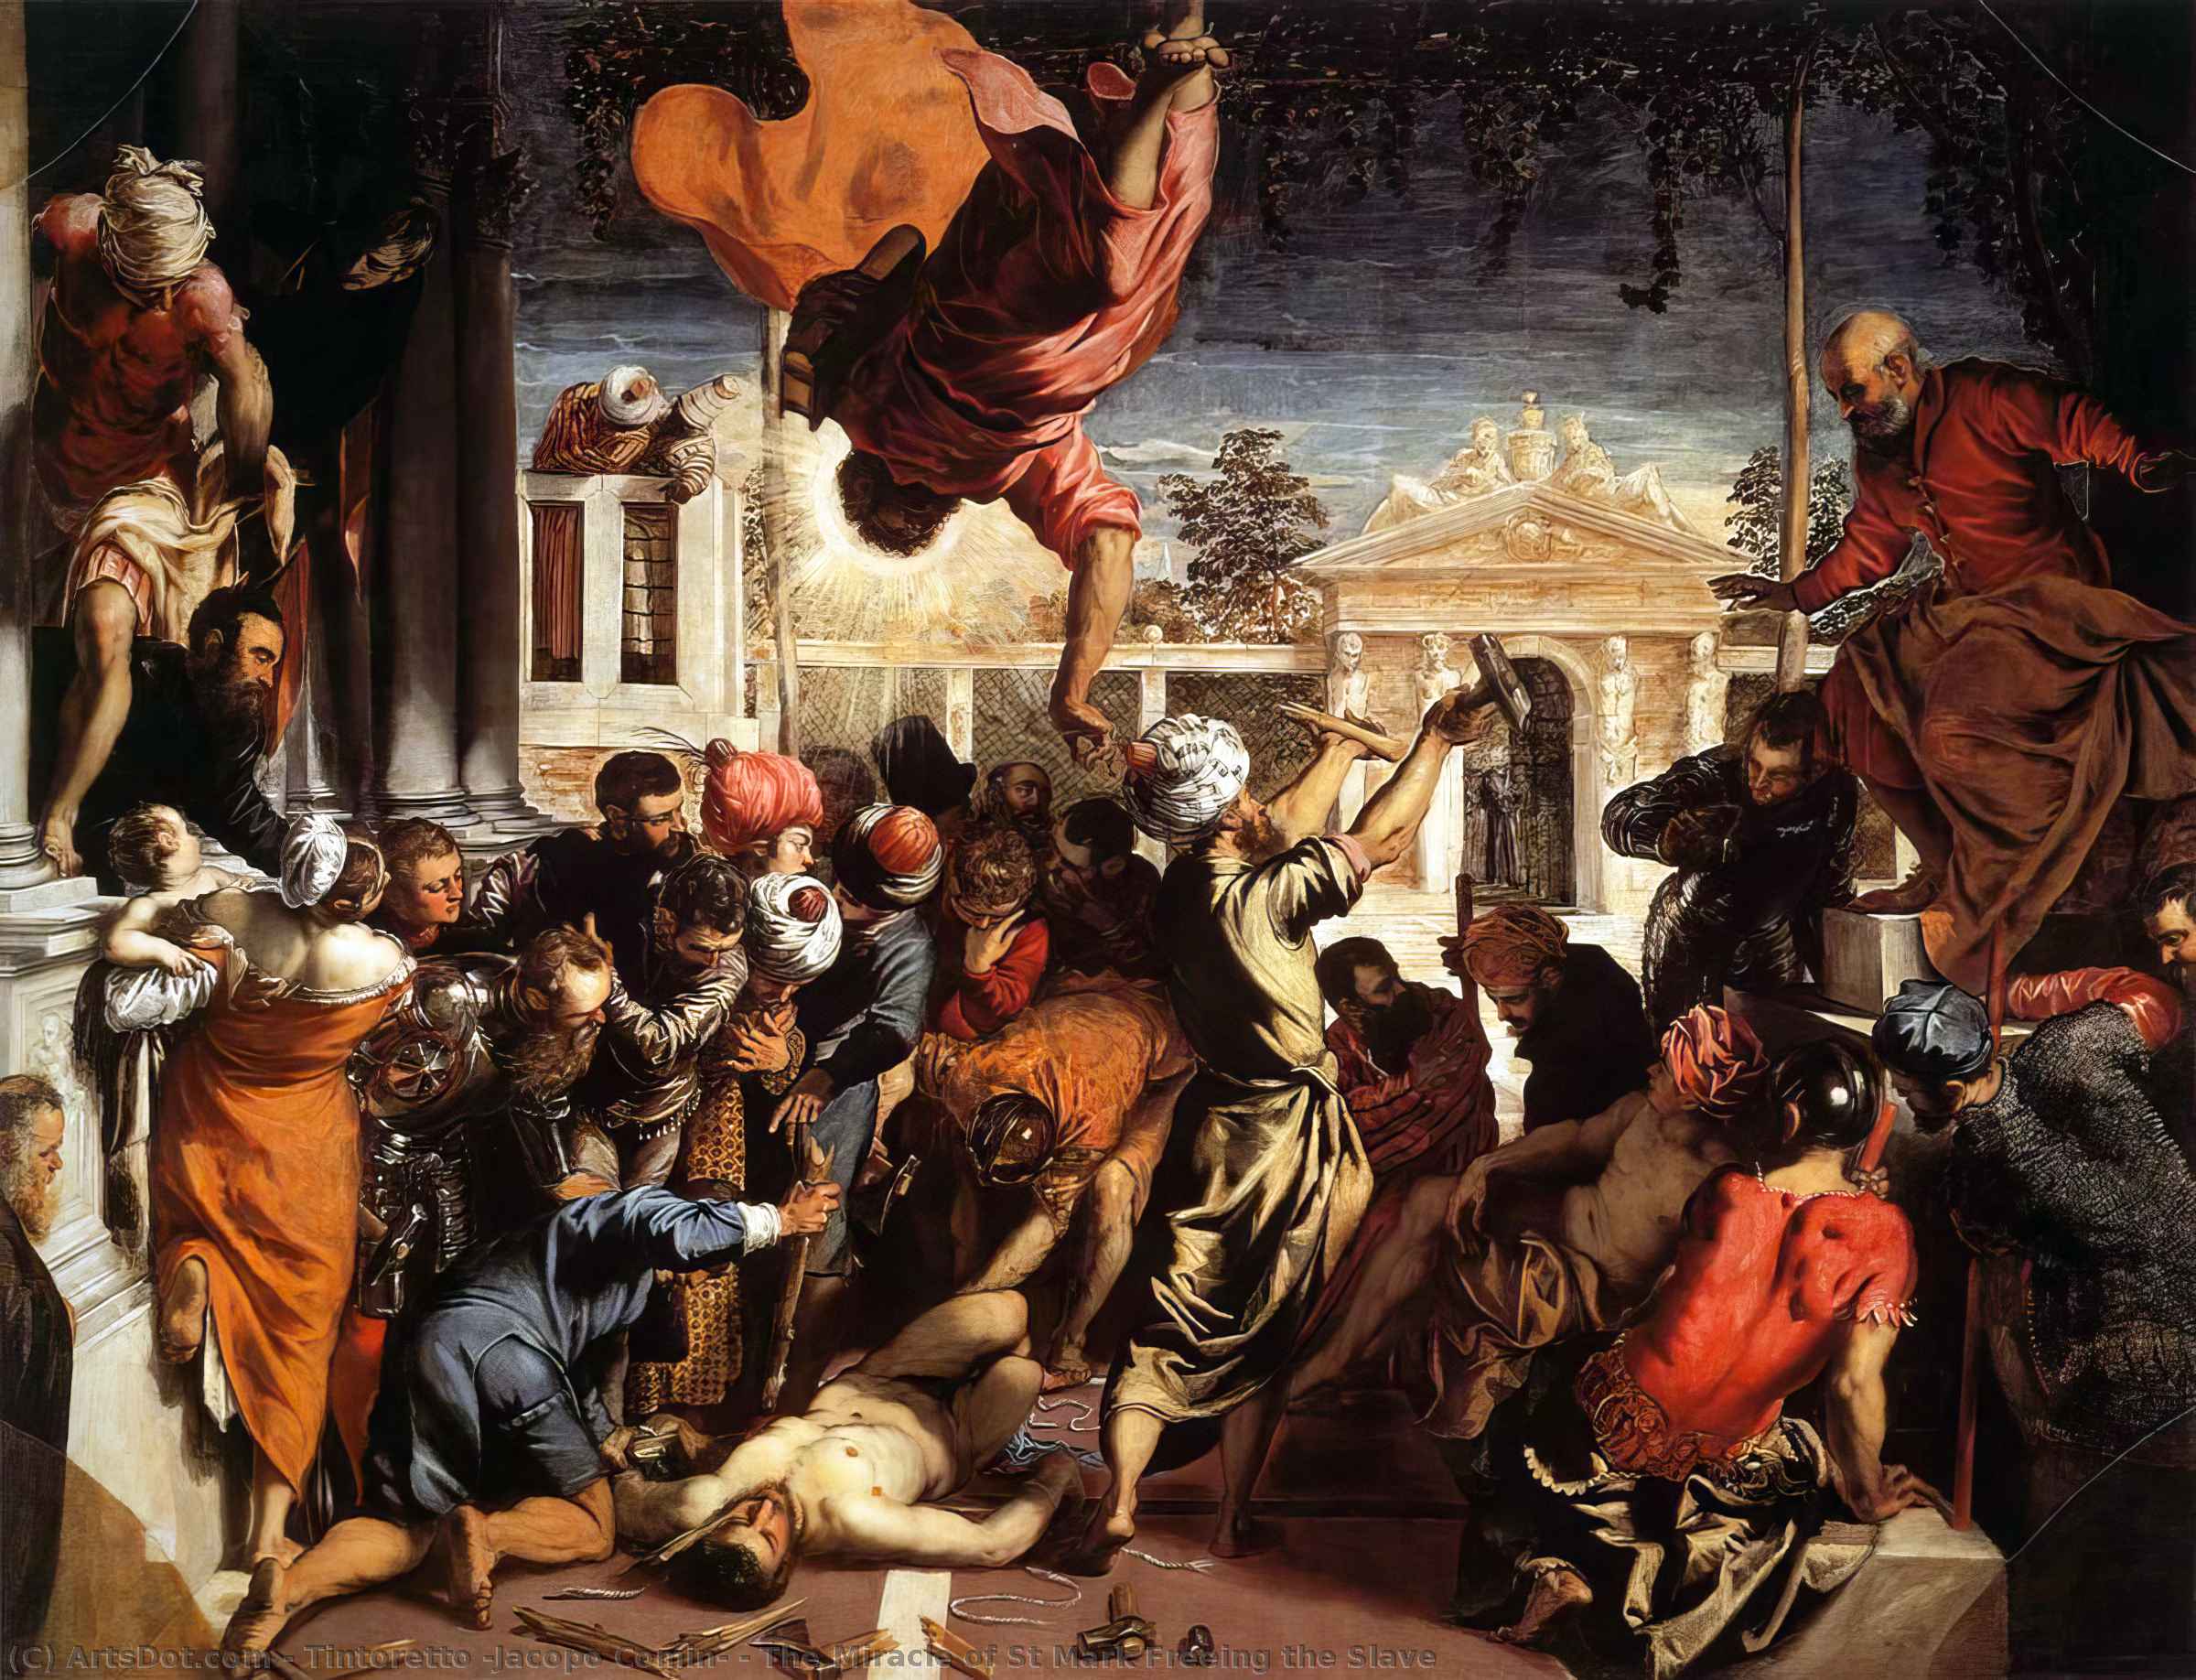 WikiOO.org - Encyclopedia of Fine Arts - Maleri, Artwork Tintoretto (Jacopo Comin) - The Miracle of St Mark Freeing the Slave